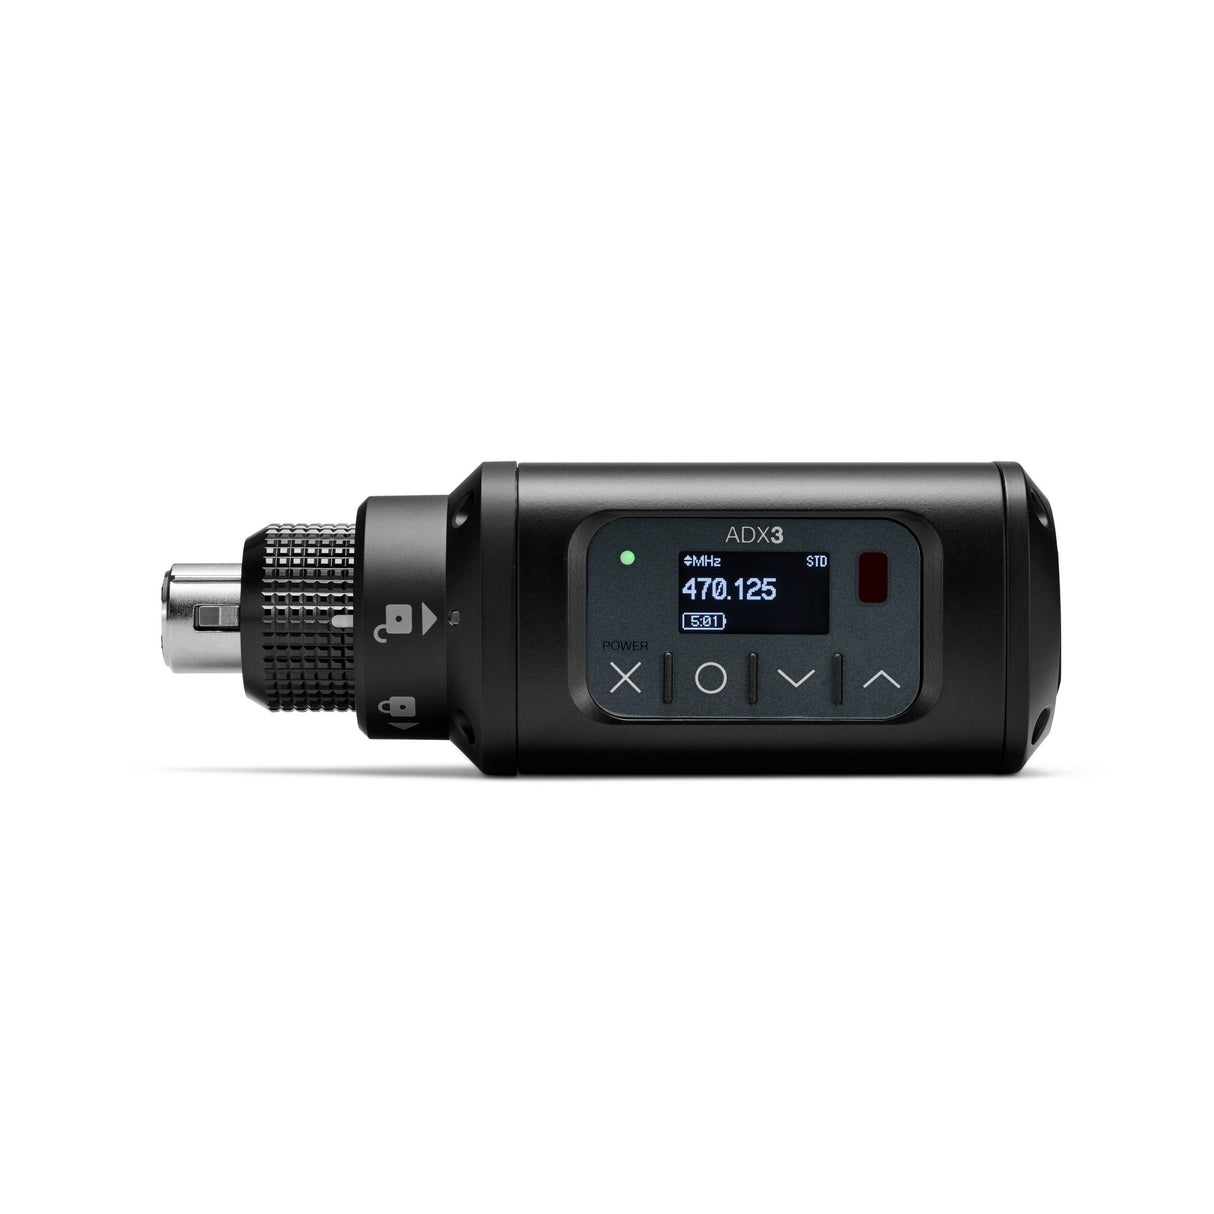 Shure ADX3 Axient Digital Plug-On Transmitter with ShowLink, G57 470-616 MHz